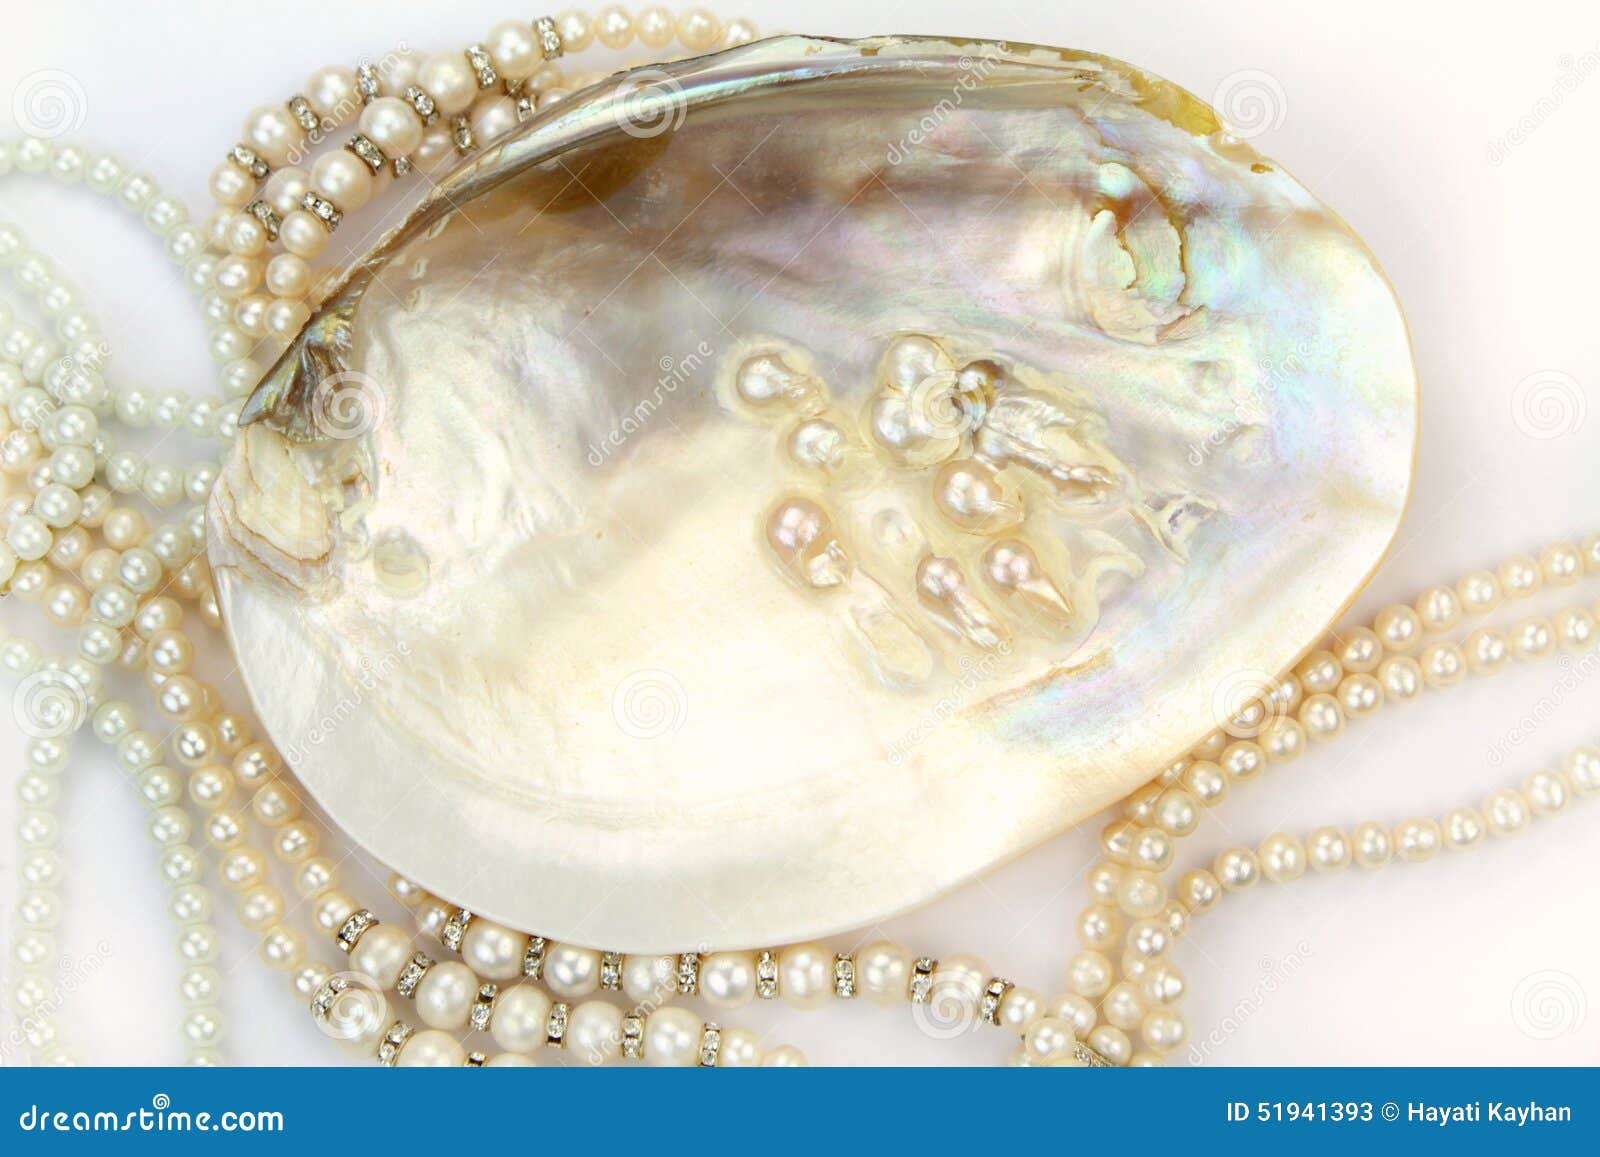 pearl necklace with natural pearls in a oyster shell